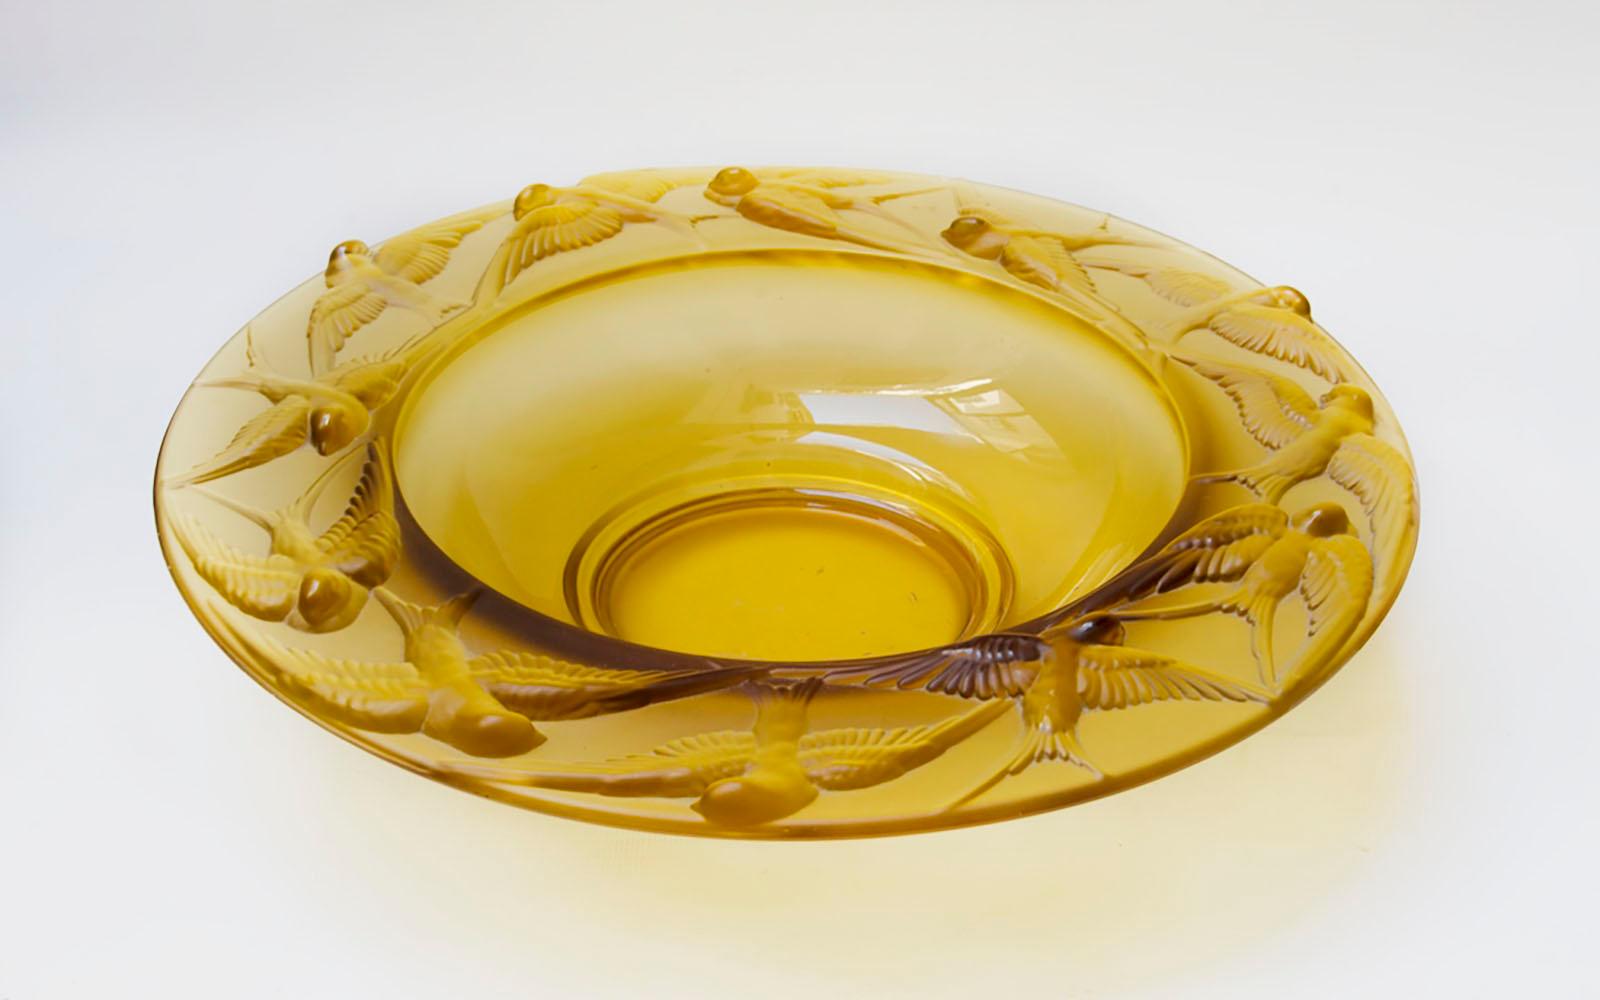 Bohemian yellow glass centerpiece from the 19th century

Striking centerpiece of the Bohemia deep plate made of European yellow glass, which has beautiful swallows carved on its edge, perfect for those maximalist environments.
Measures:
Height: 7.5